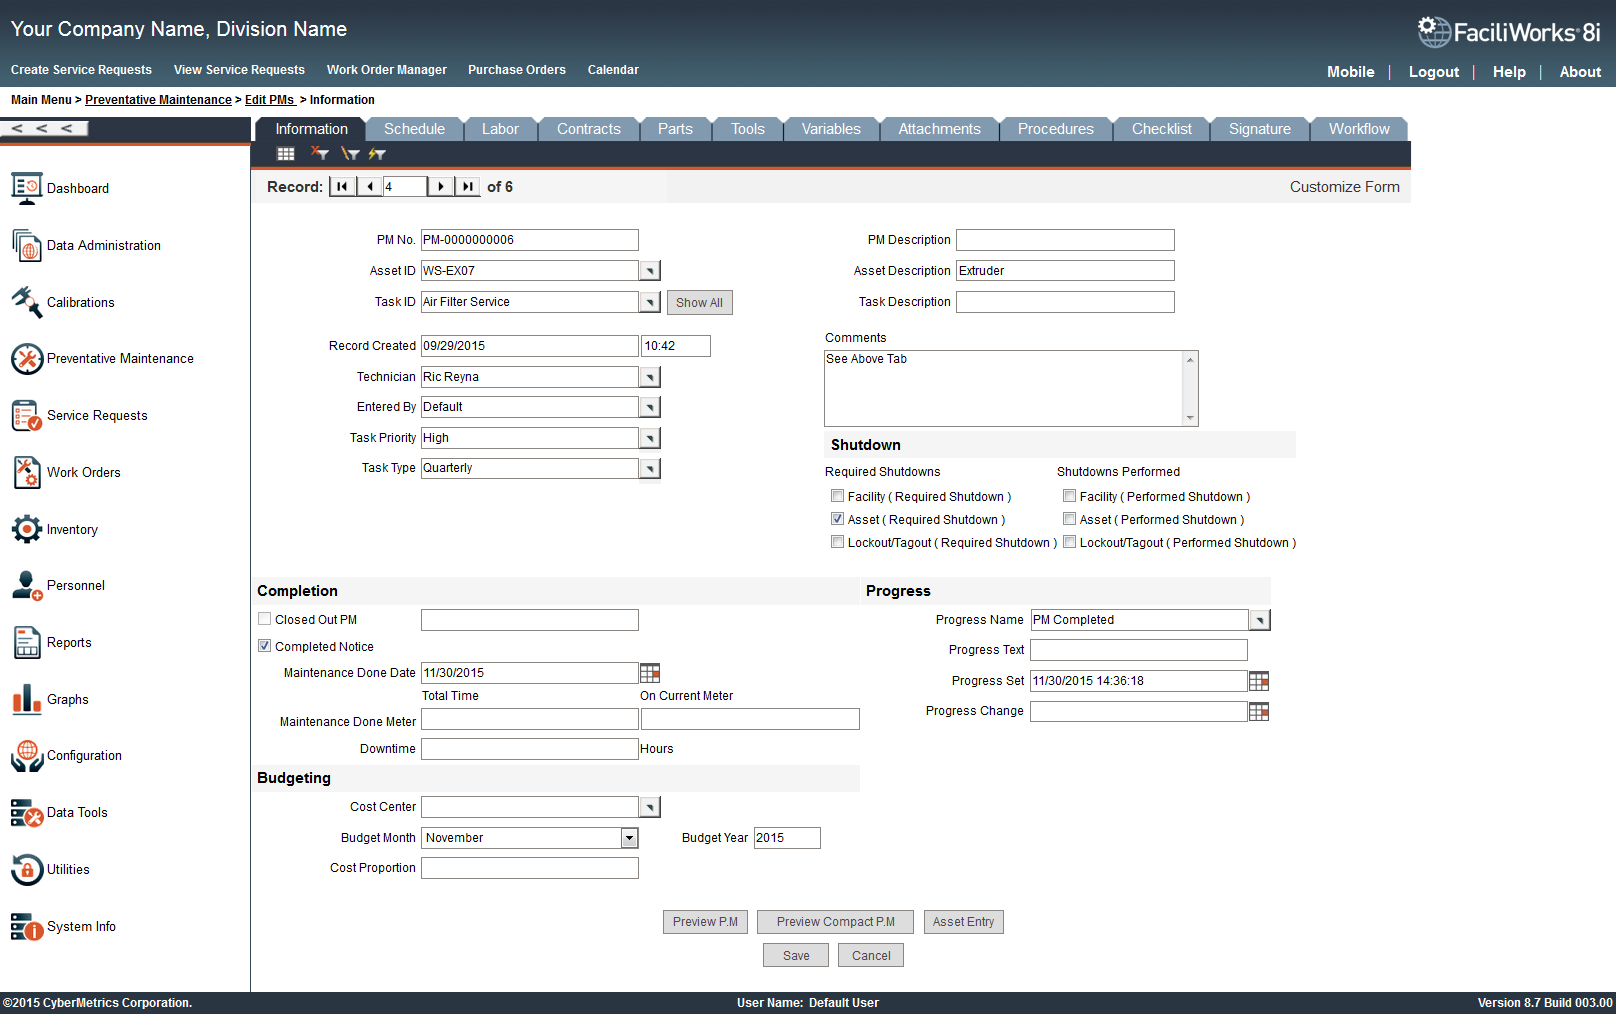 The FaciliWorks CMMS Work Order and Preventative Maintenance system allows you to edit or view your records in summary tables or detailed forms. Built-in shortcuts for finding and filtering make it easy to get to just the records you want.